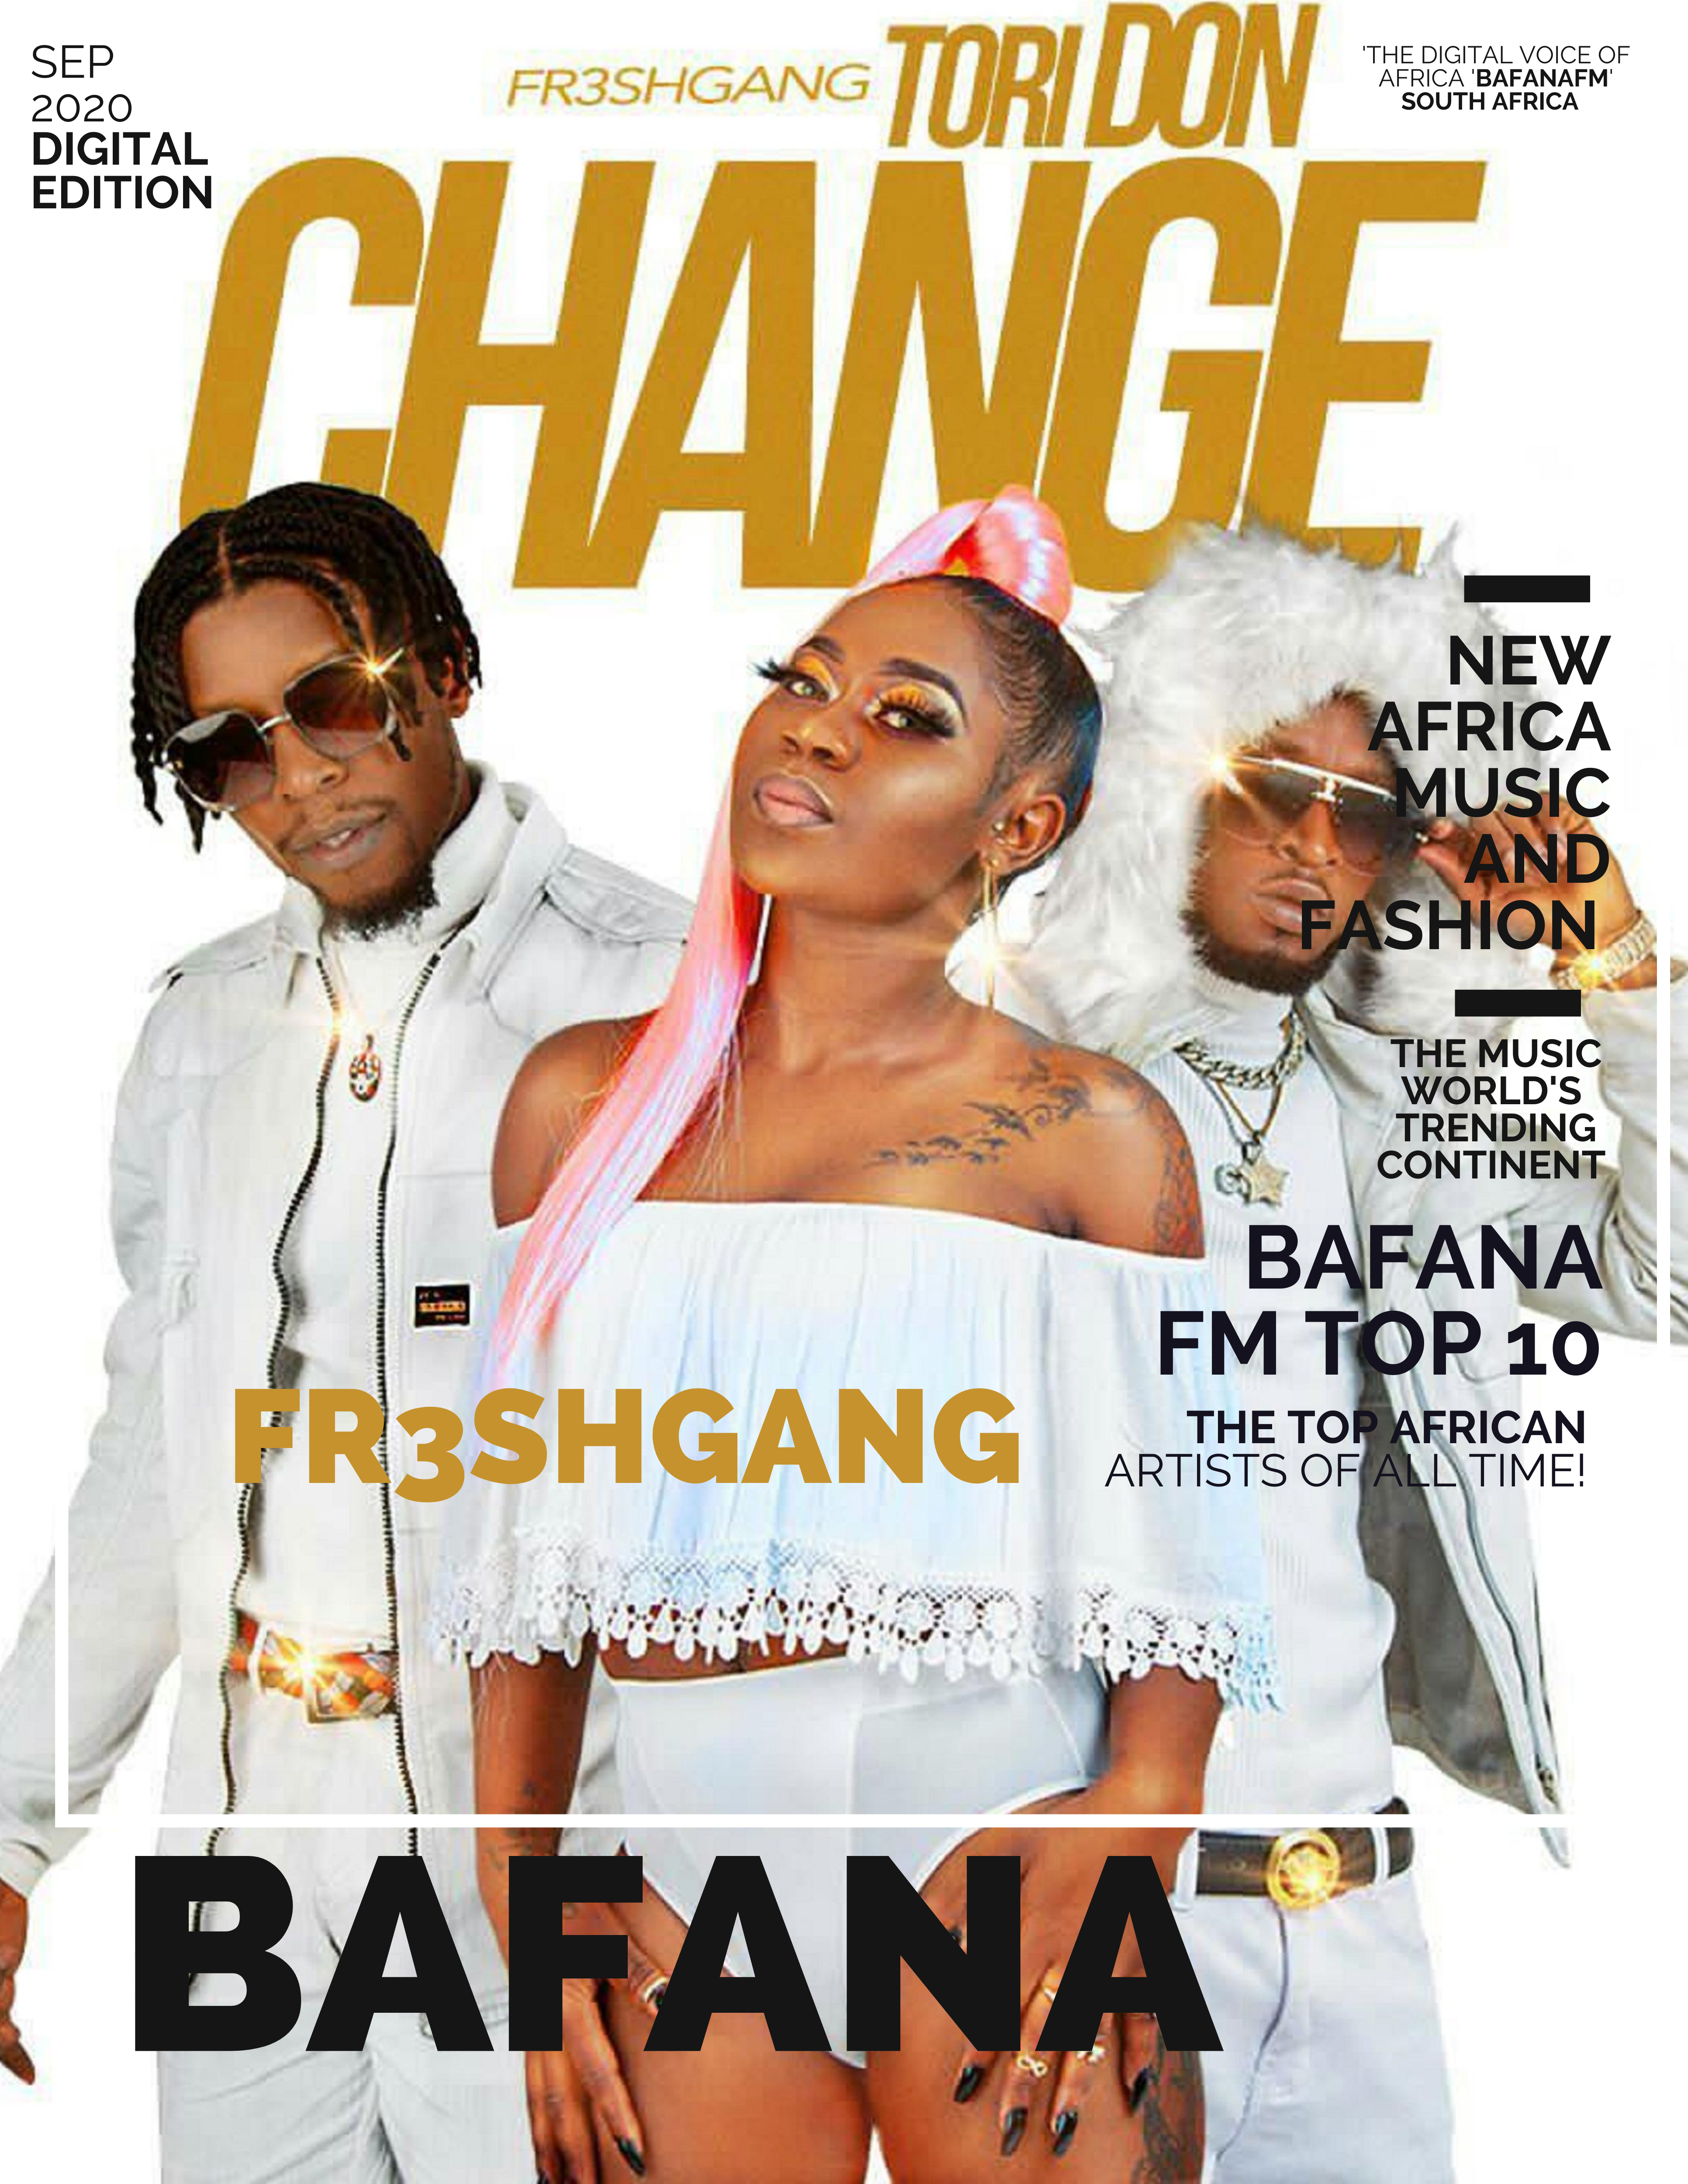 BAFANA FM BEST NEW AFRO-BEATS: Cameroon presents a world class Afro-Trap meets indigenous sexy Hip-Hop vibe on infectious single from ‘FR3SHGANG’ who unleash hot video ‘Tori Don Change’ soon. – On The Playlist